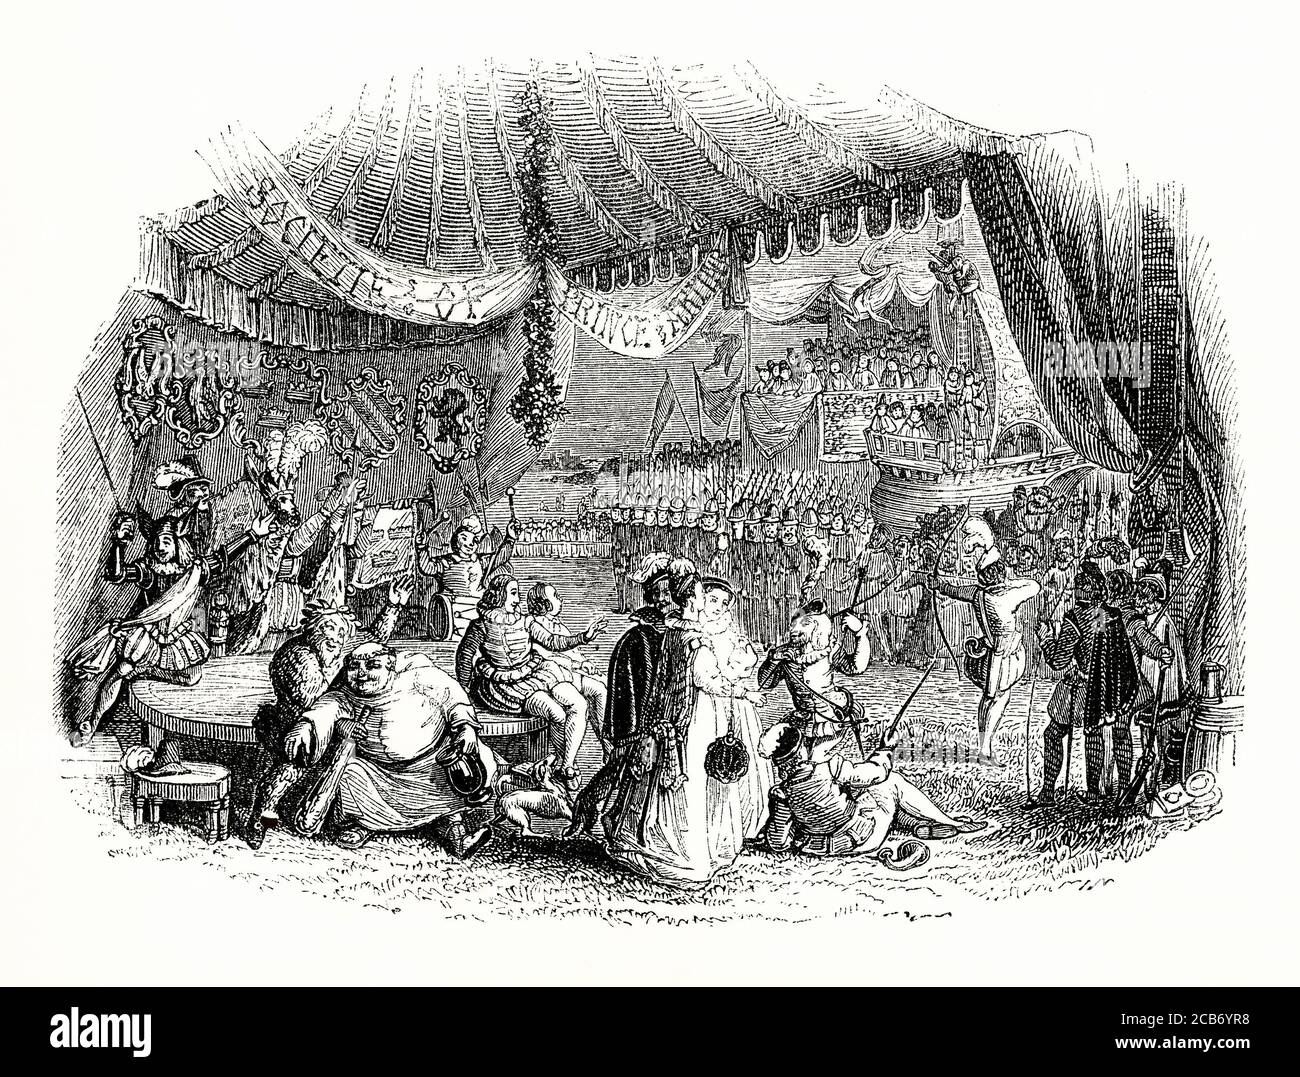 An old engraving of an impressive archery pageant during the reign of Henry VIII, at Mile End, England, UK in the early 1500s. The Fraternity of Prince Arthur was a group of Tudor longbowmen who practised in the fields of Mile End in present-day east London. They were named after King Henry VIII’s elder brother, Prince Arthur who died in 1502 aged 15. As Prince of Wales and later as King, Henry VIII visited the Fraternity, watching them shoot and enjoying their feasts. He became their patron and confirmed by charter their 'famous Order of Knights of Prince Arthur’s Round Table, or Society'. Stock Photo